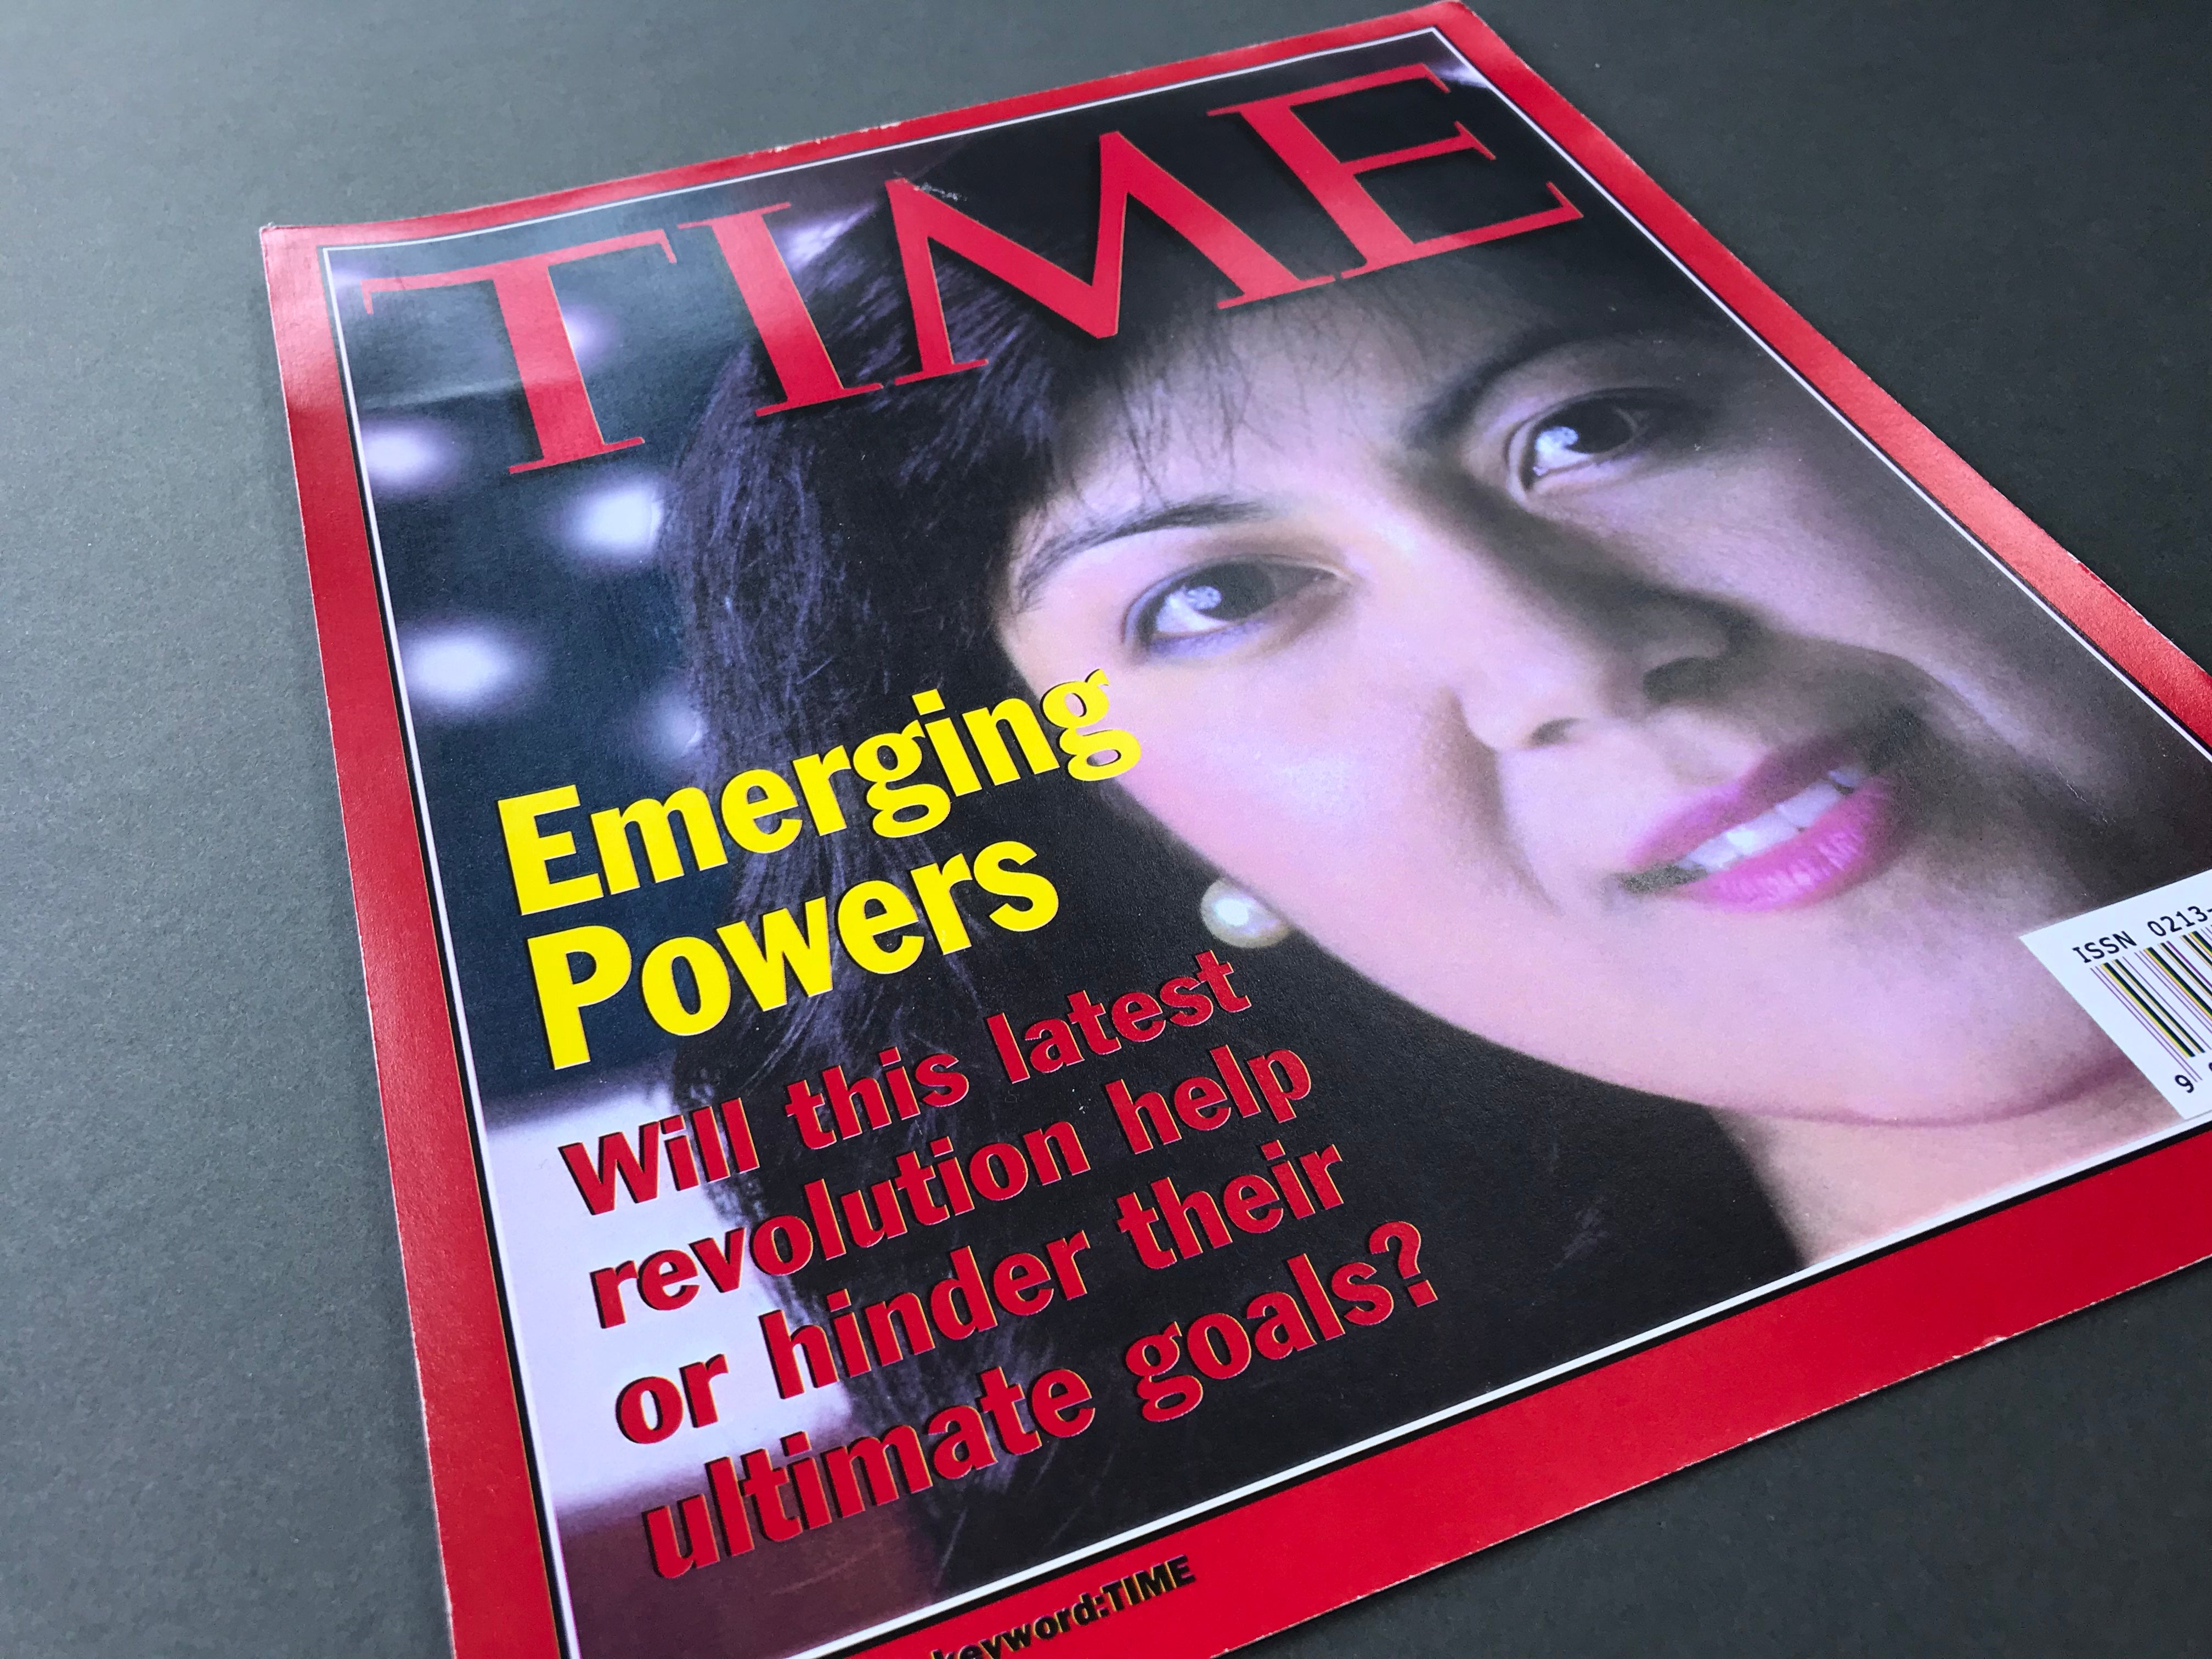 Minority Report (2002) - A Prop ‘TIME’ Magazine Front Page